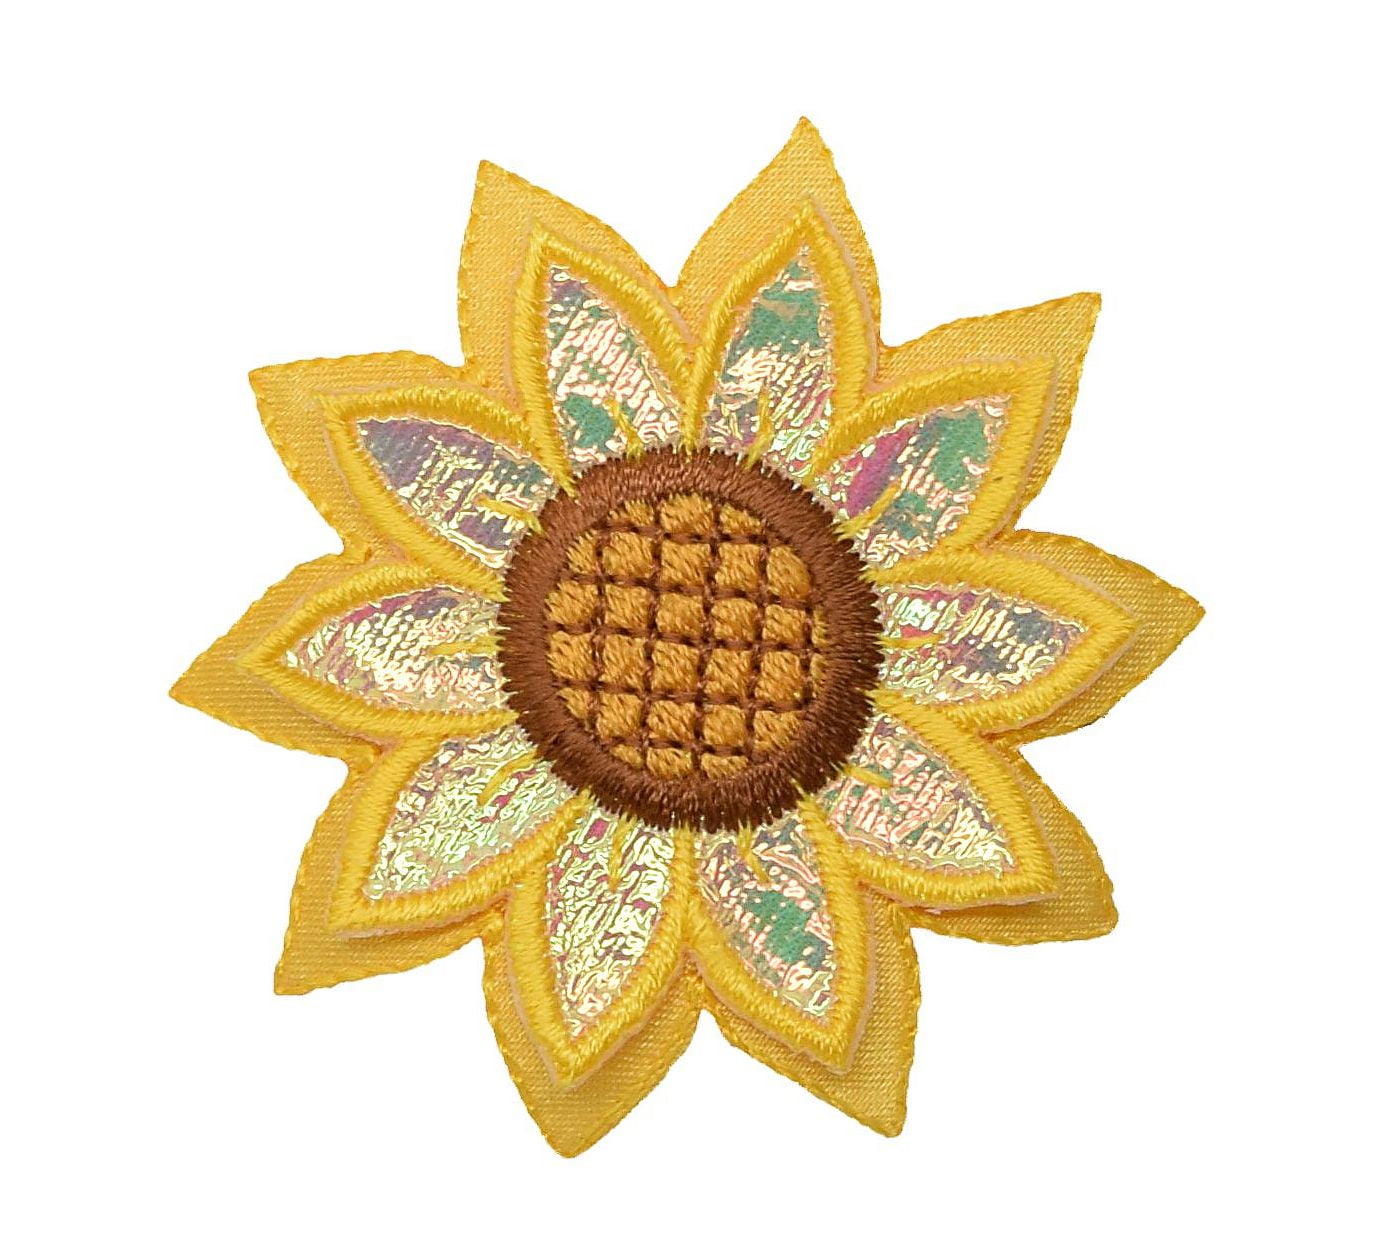 Three Flower Leaf Iron On Embroidery Applique Patch Sew Iron Badge 